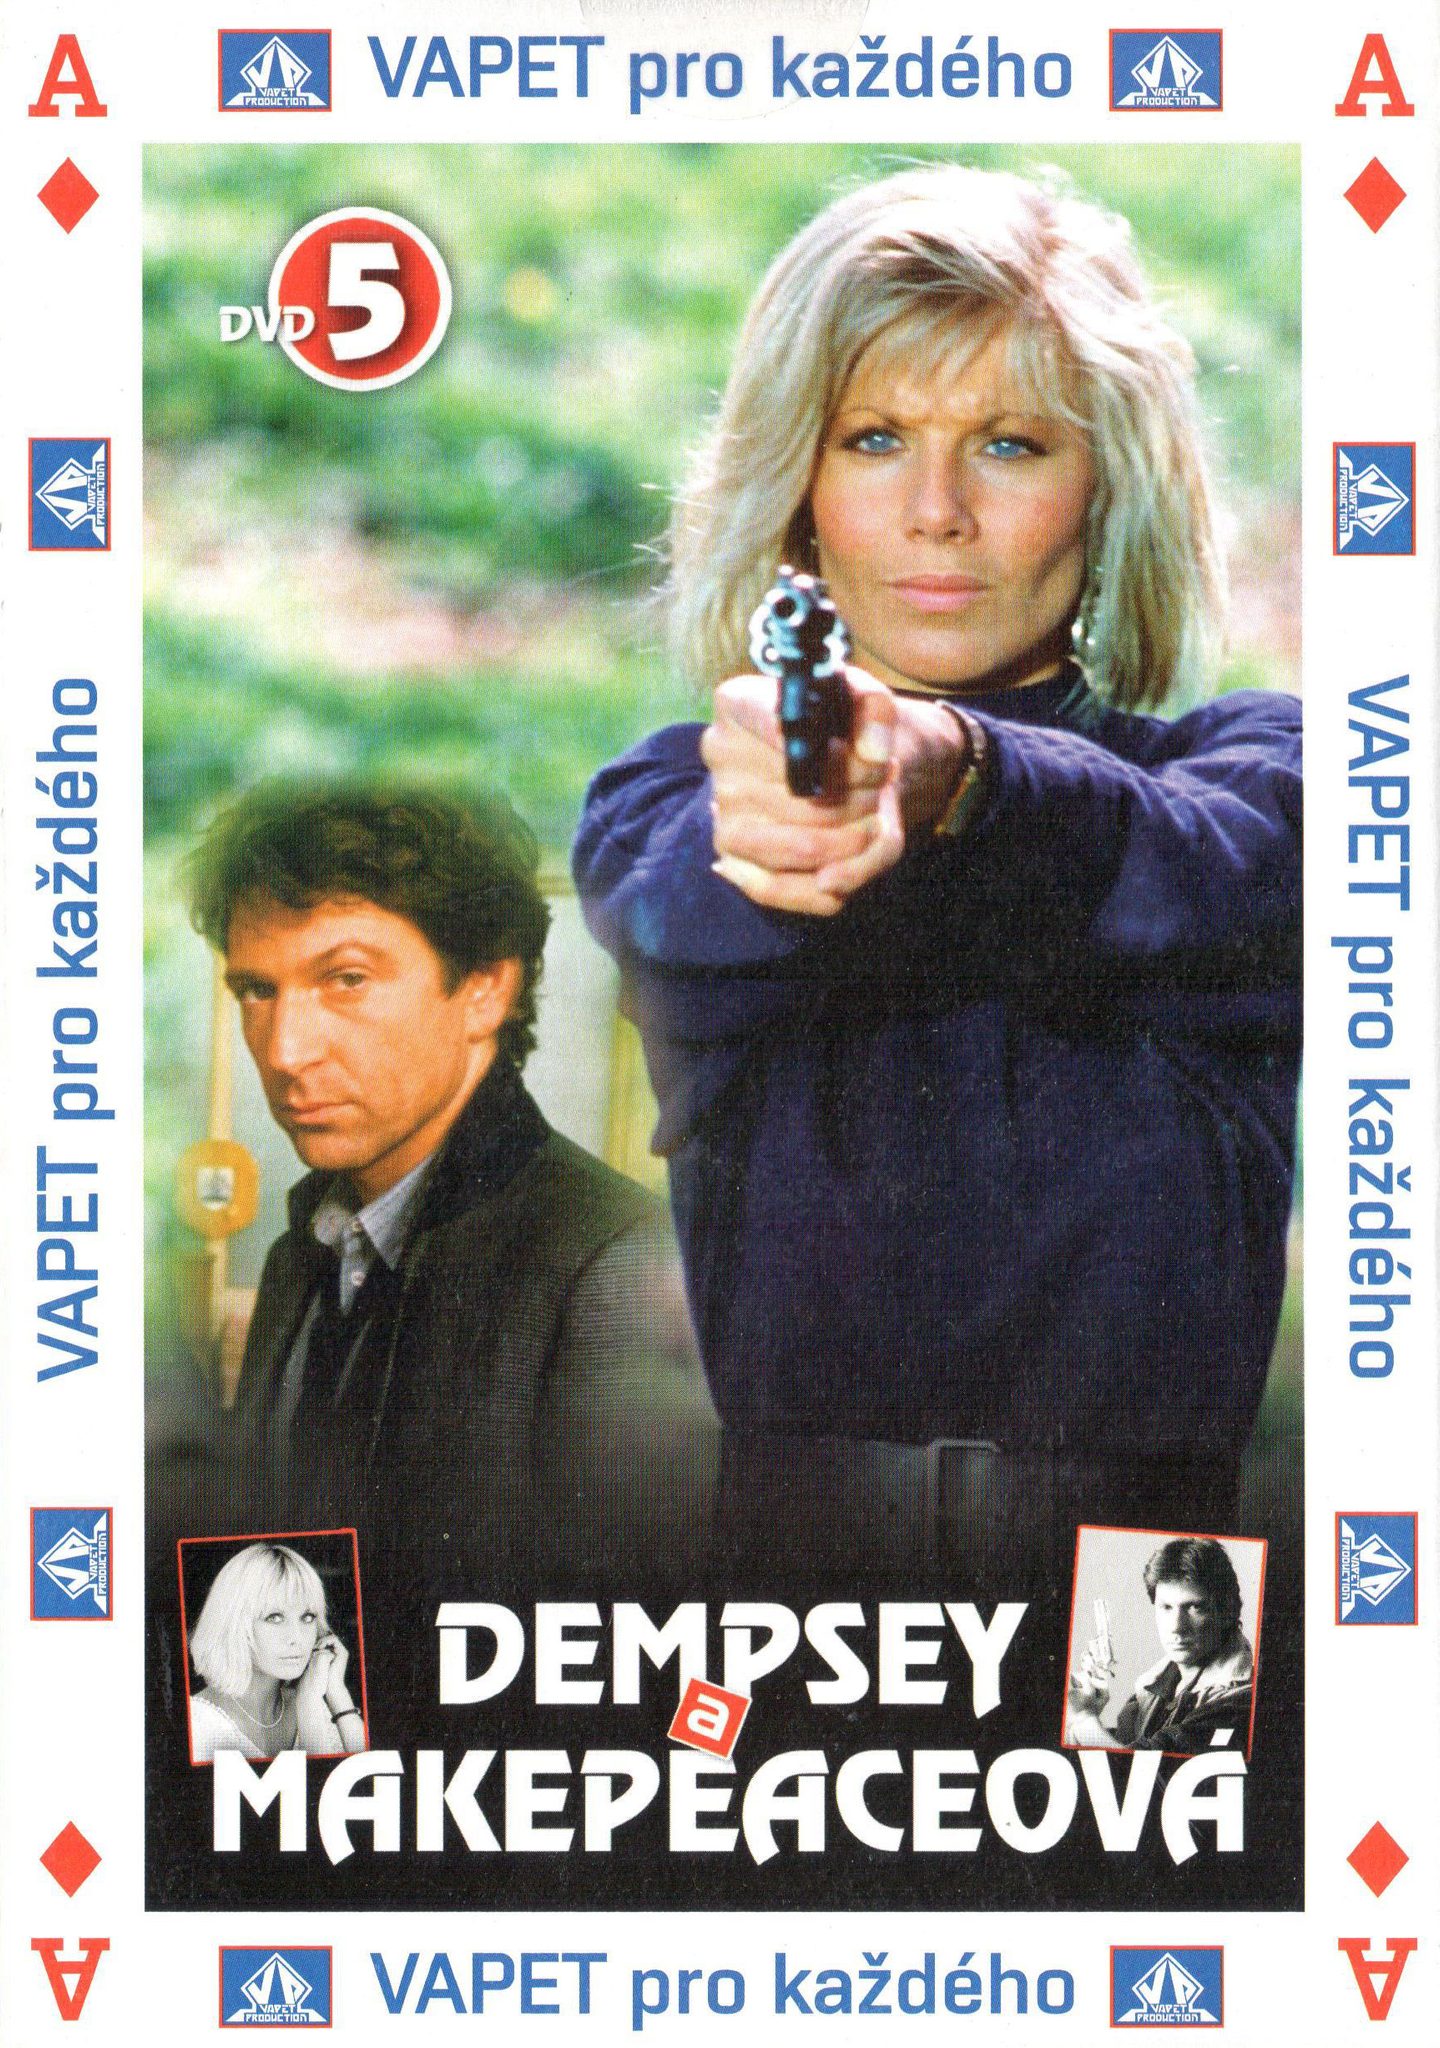 DVD Dempsey a Makepeaceov 5